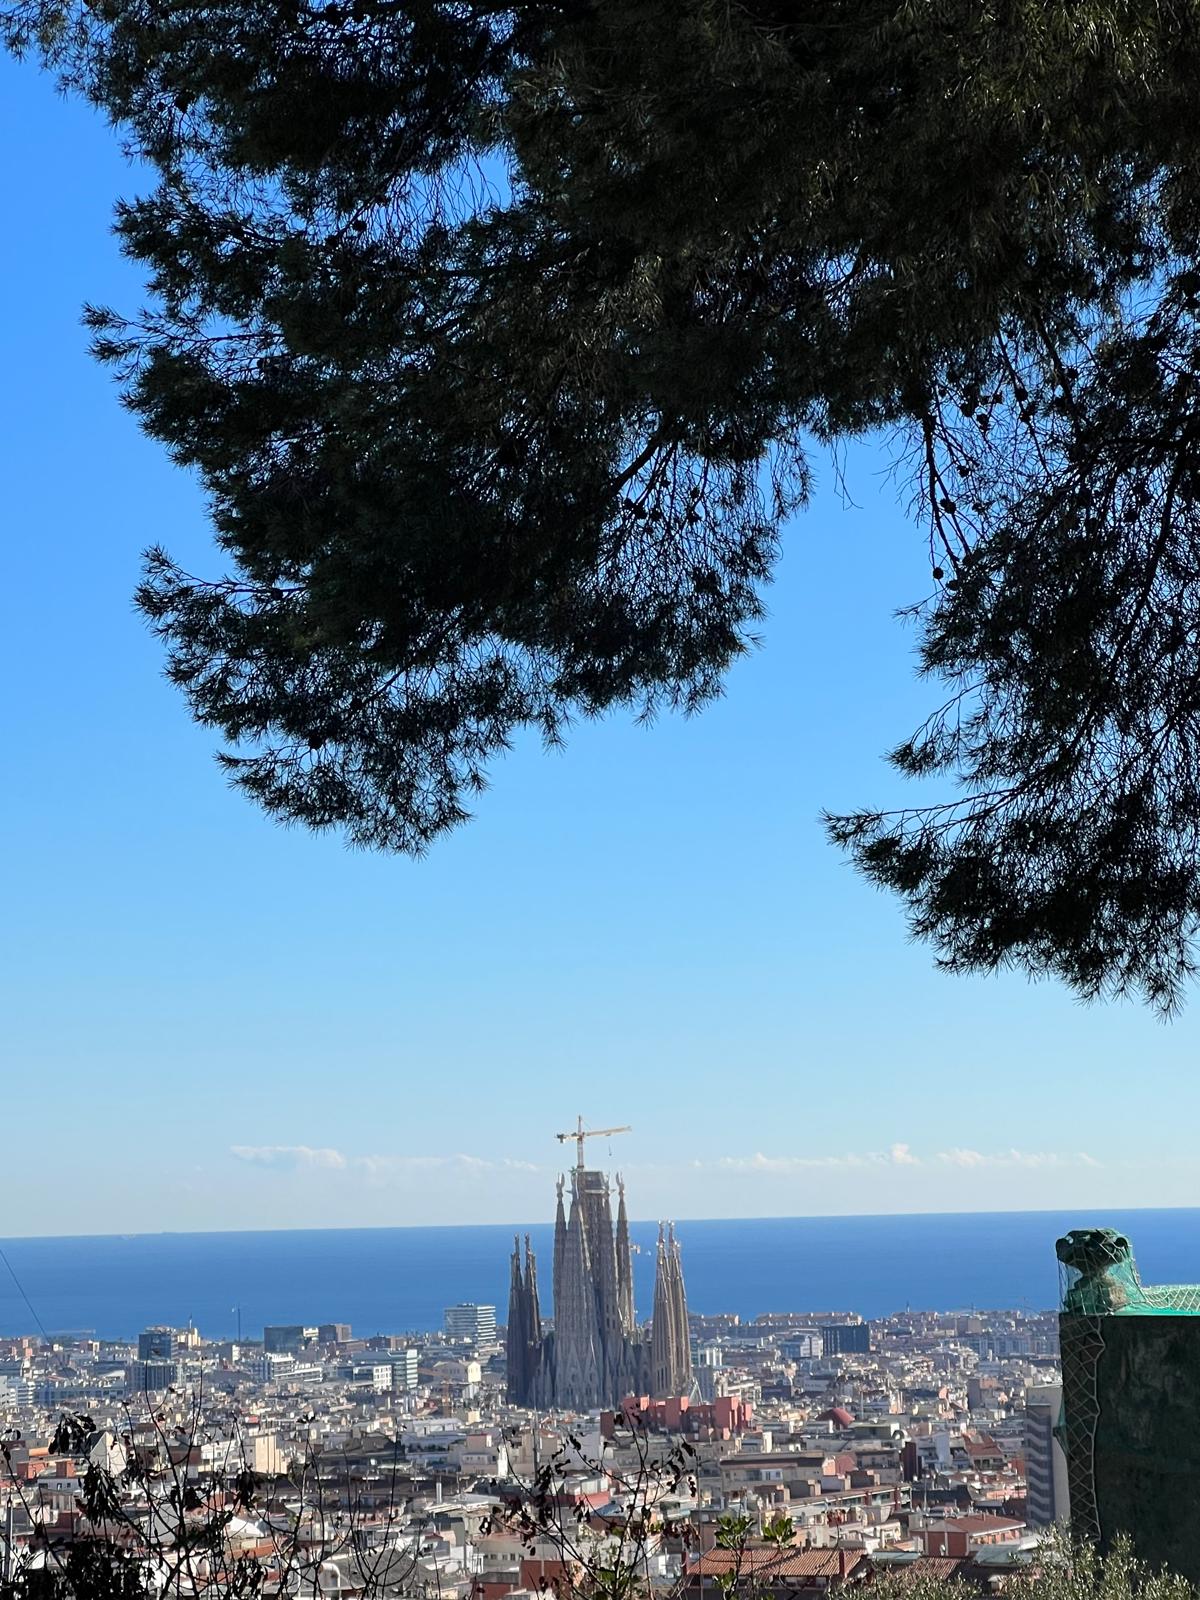 The beauty of Barcelona from Parc Guell